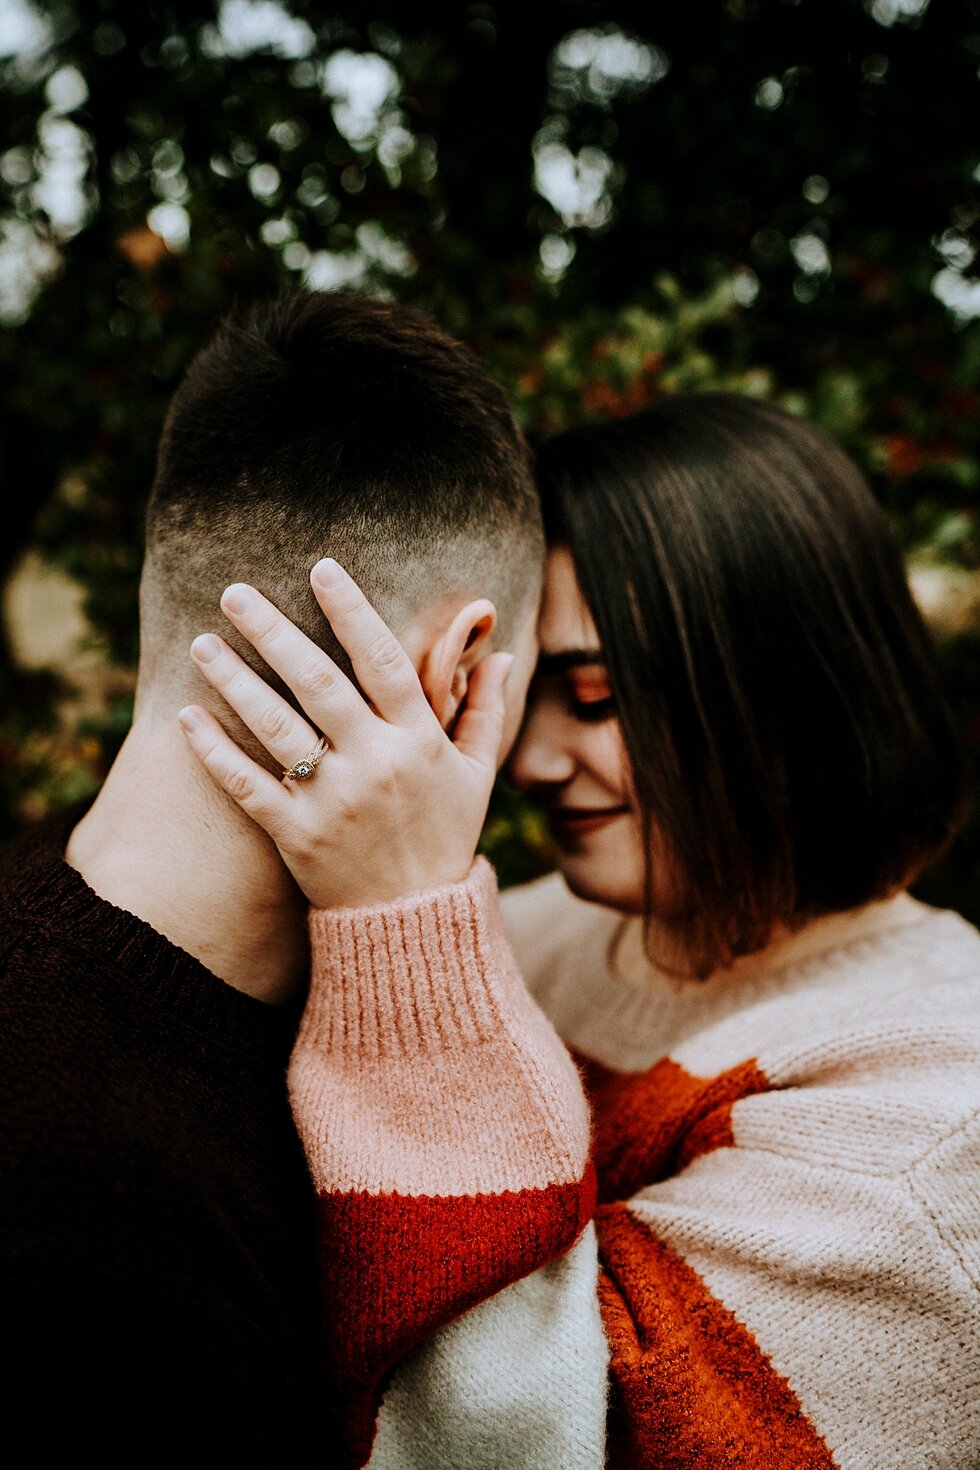  Engagement ring photo as the soon to be bride holds her hand against her fiance’s head and neck. #engagementgoals #engagementphotographer #engaged #outdoorengagement #kentuckyphotographer #indianaphotographer #louisvillephotographer #engagementphoto